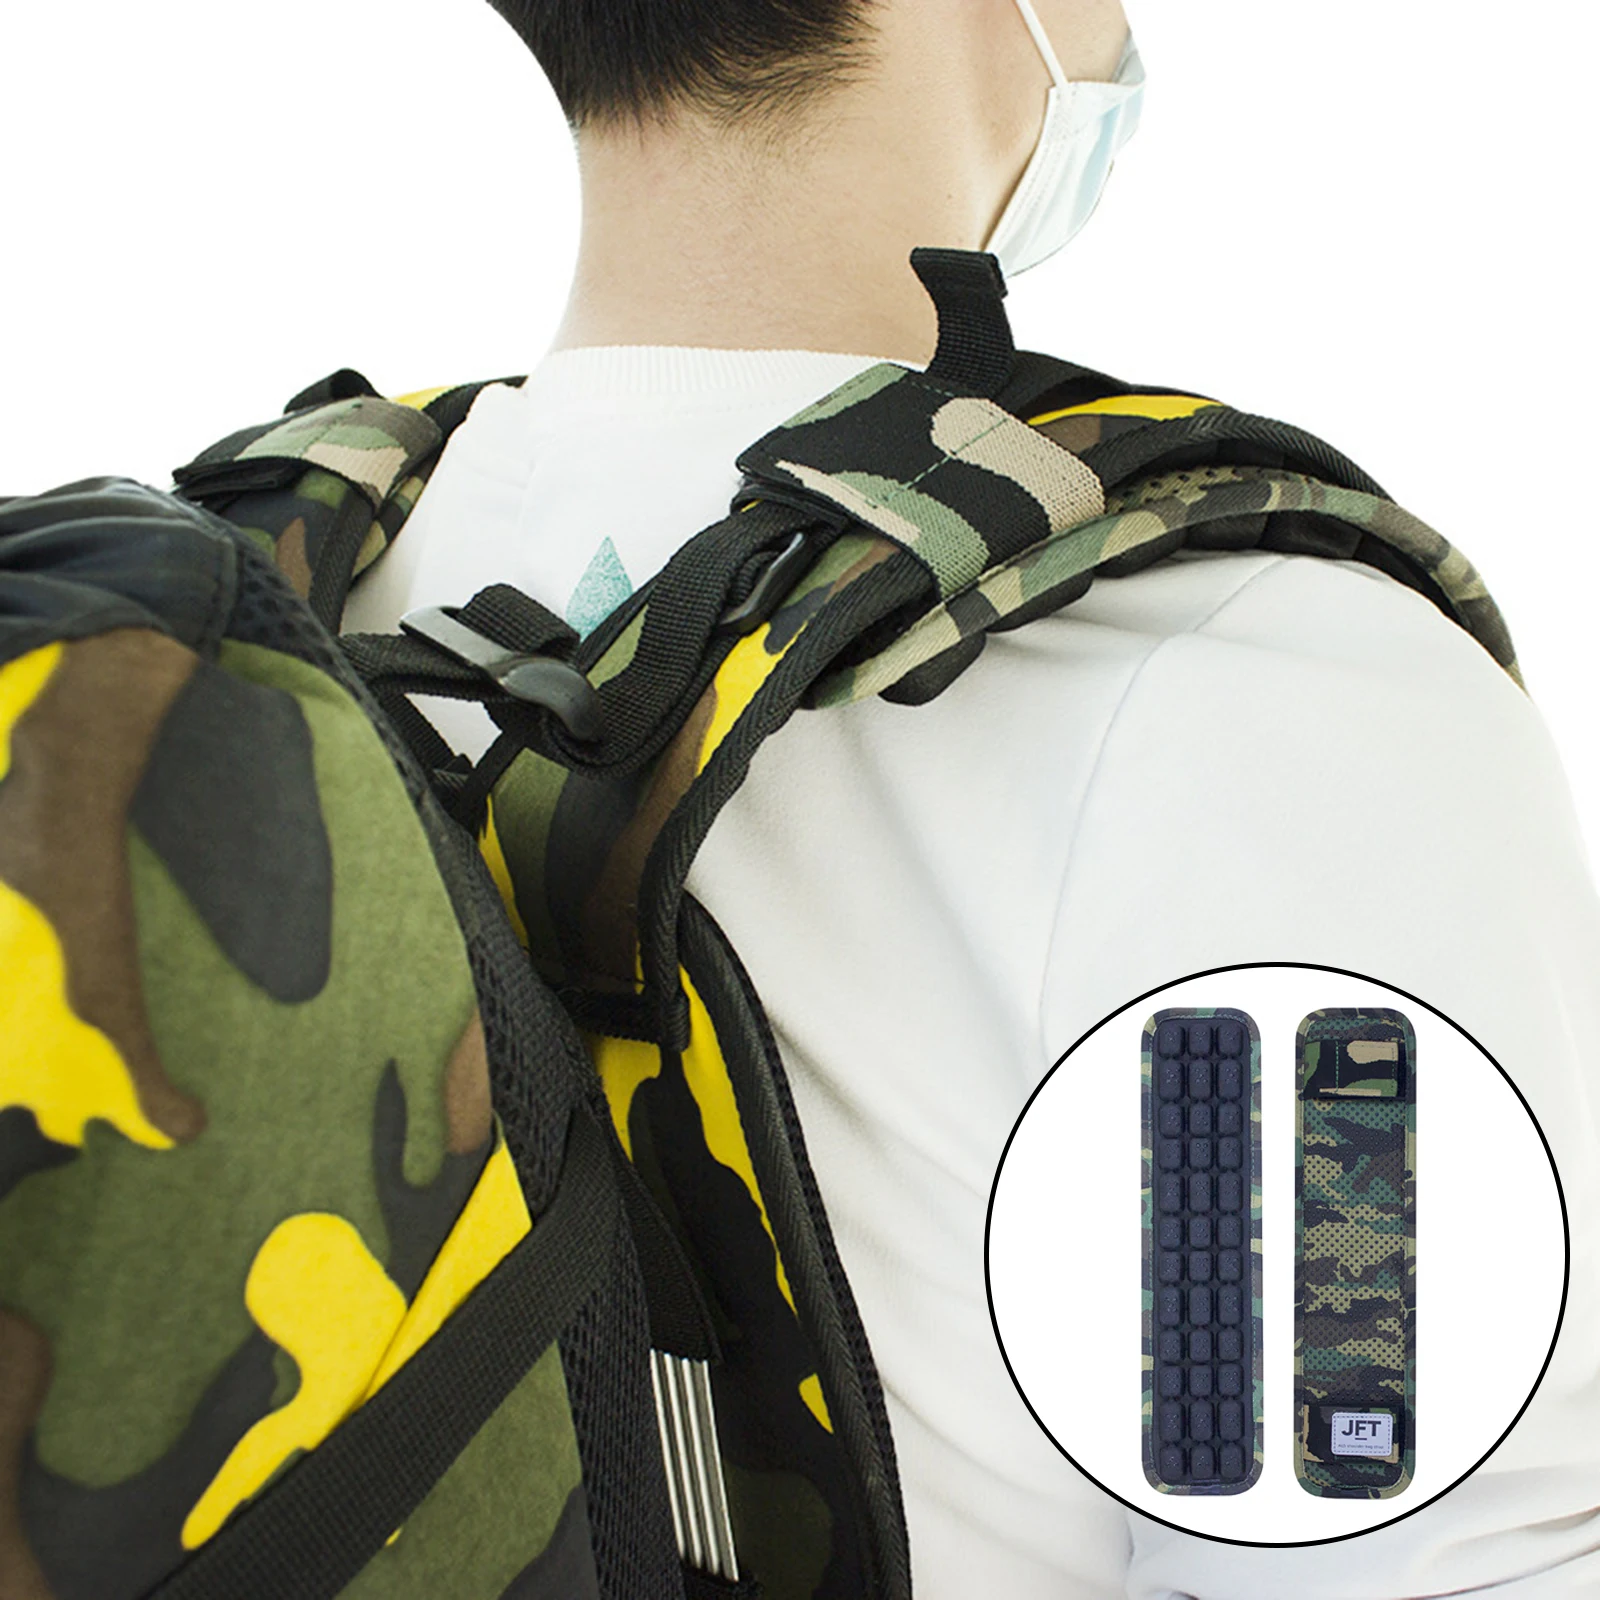 1 Pair Backpack Shoulder Strap Pad Cushion Bags Carrying Harness 33.5x8.5cm